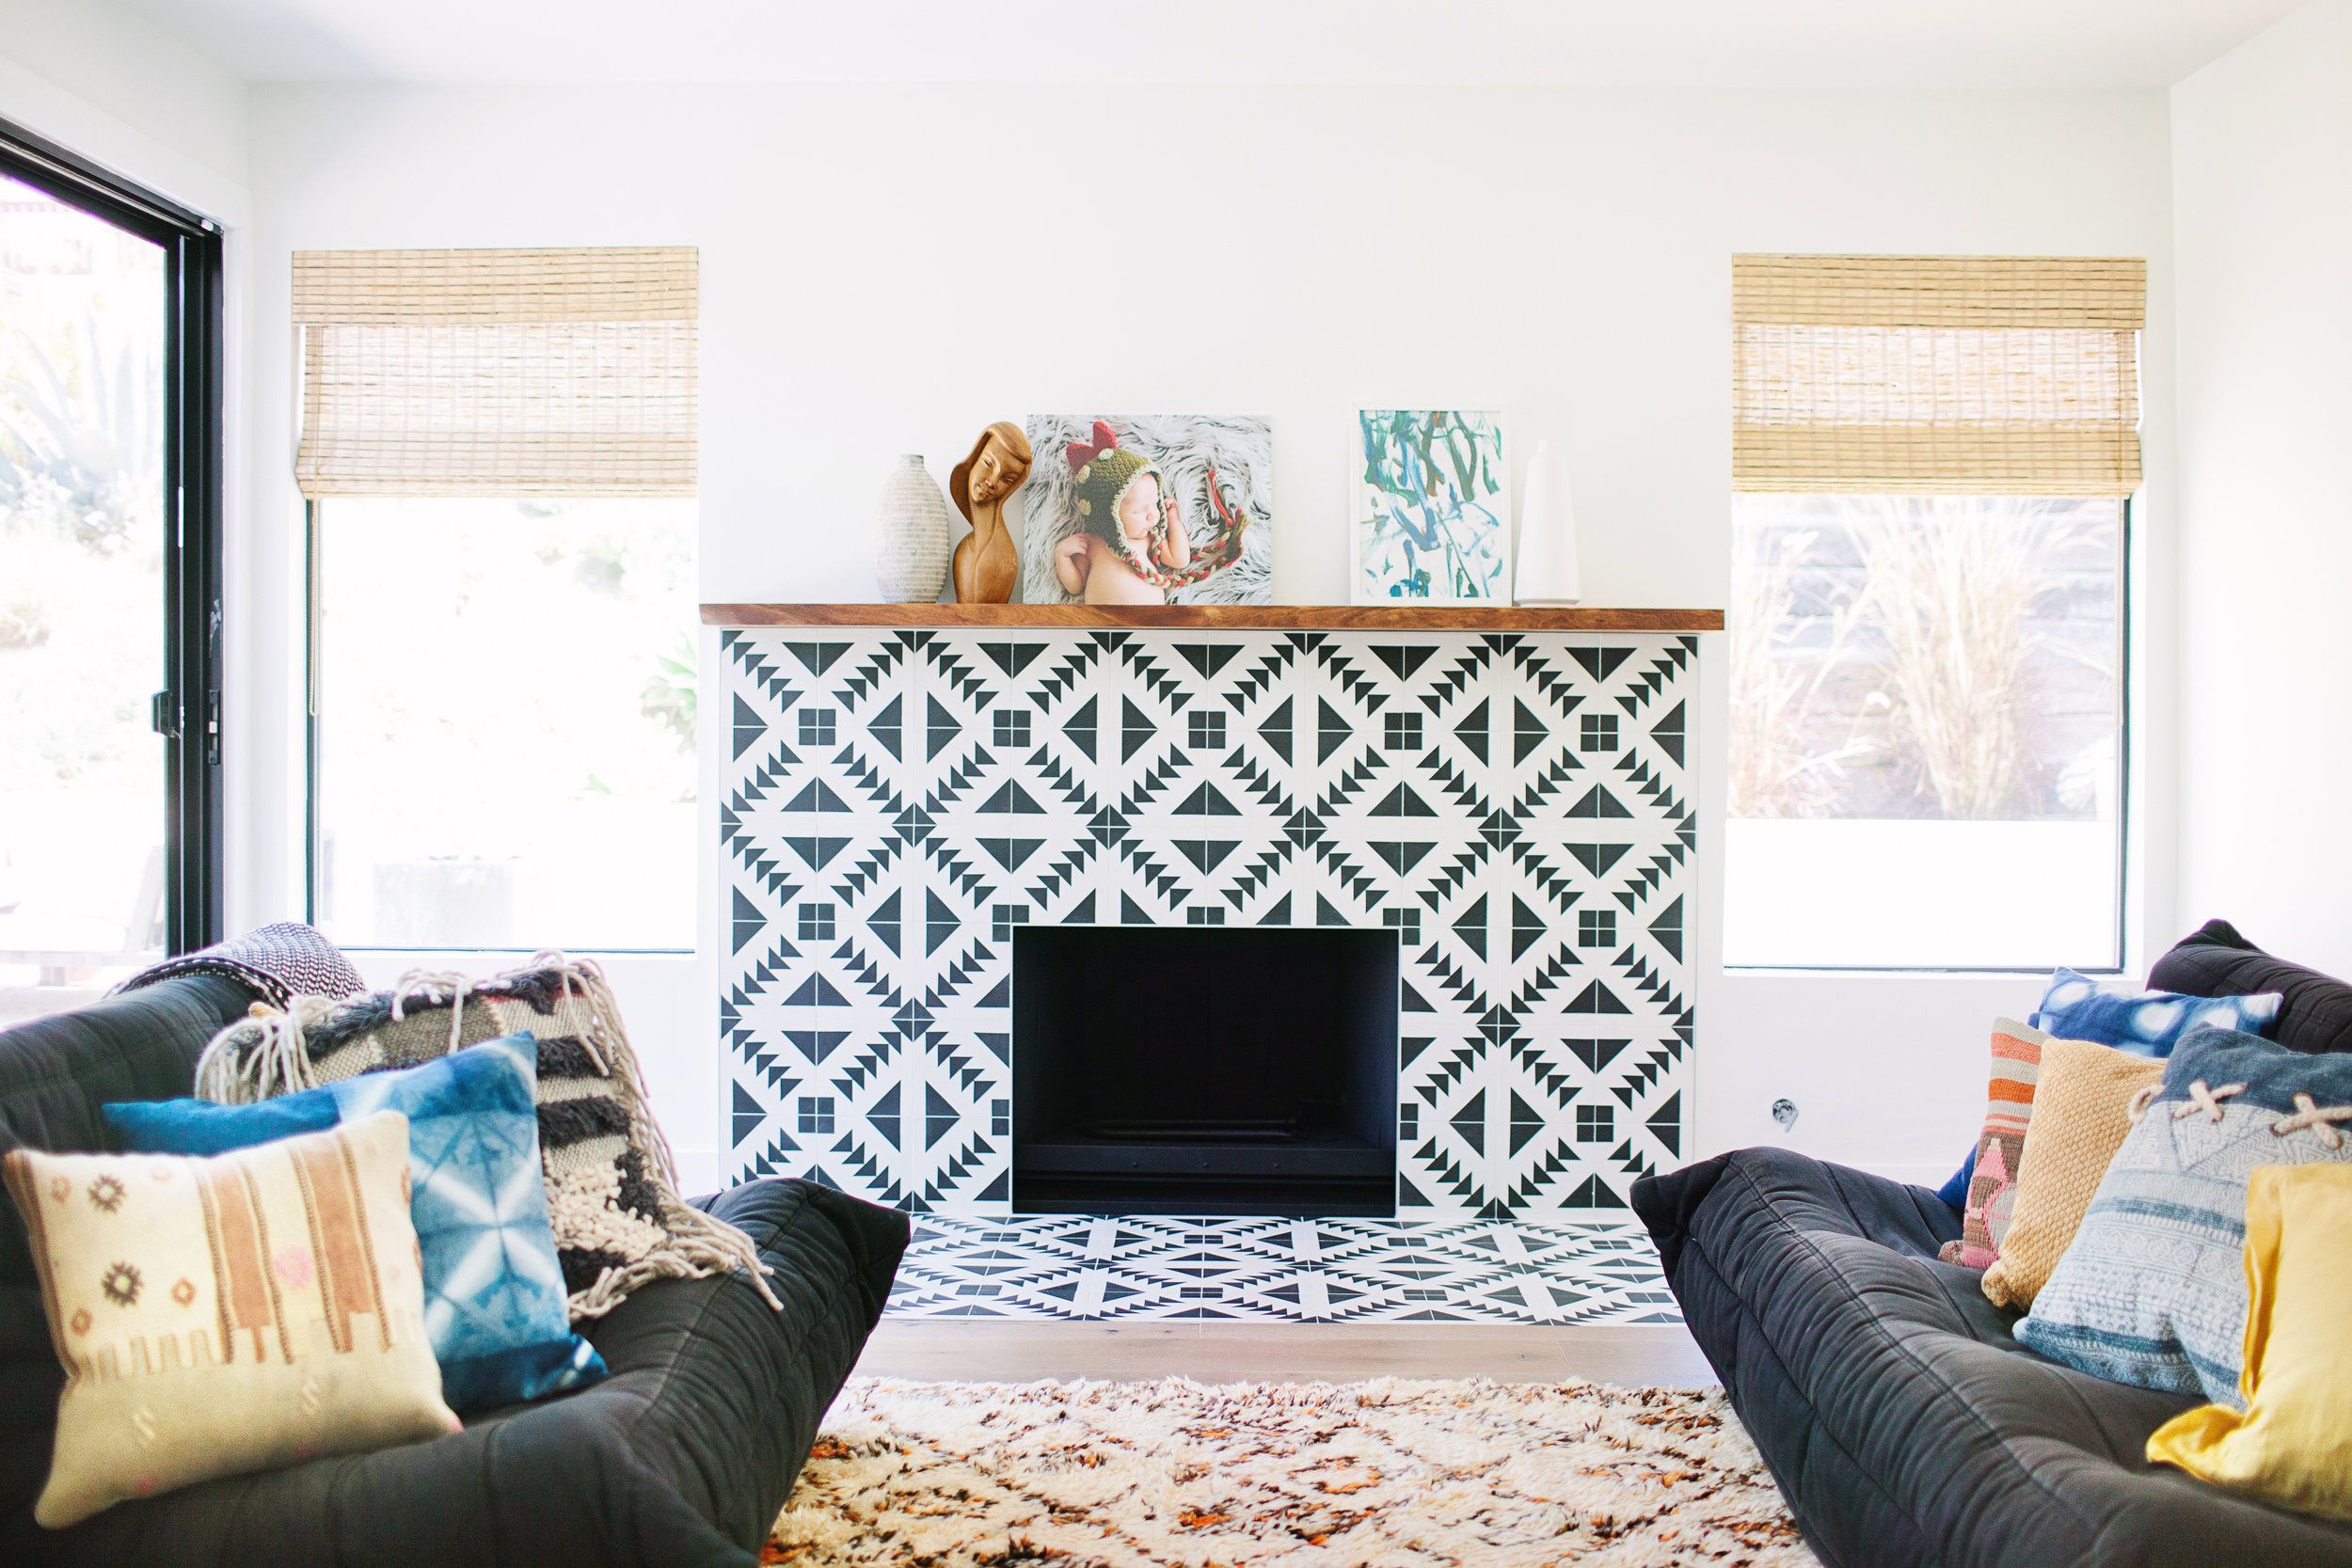 How to Install A Fireplace Mantel Shelf Fresh 25 Beautifully Tiled Fireplaces